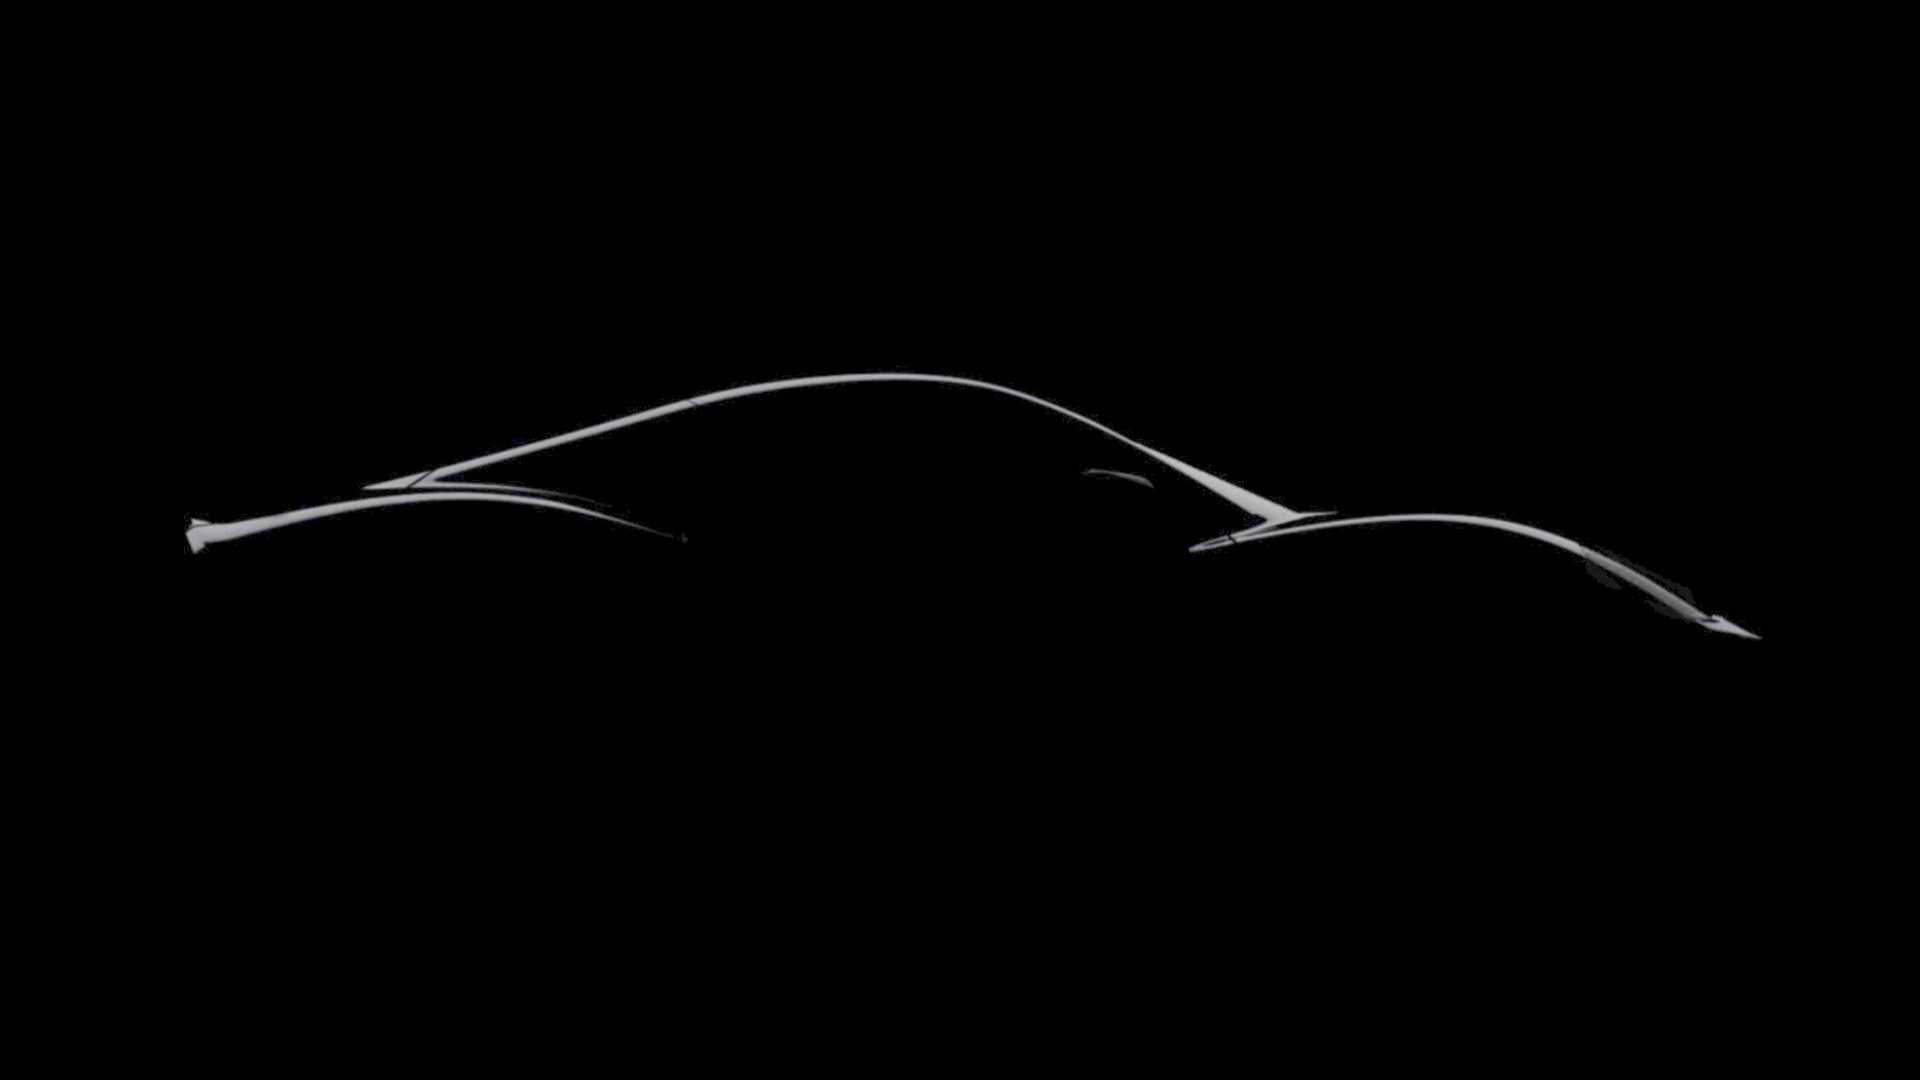 Caterham Project V Teased As Electric Sports Car With "Bold New Design"